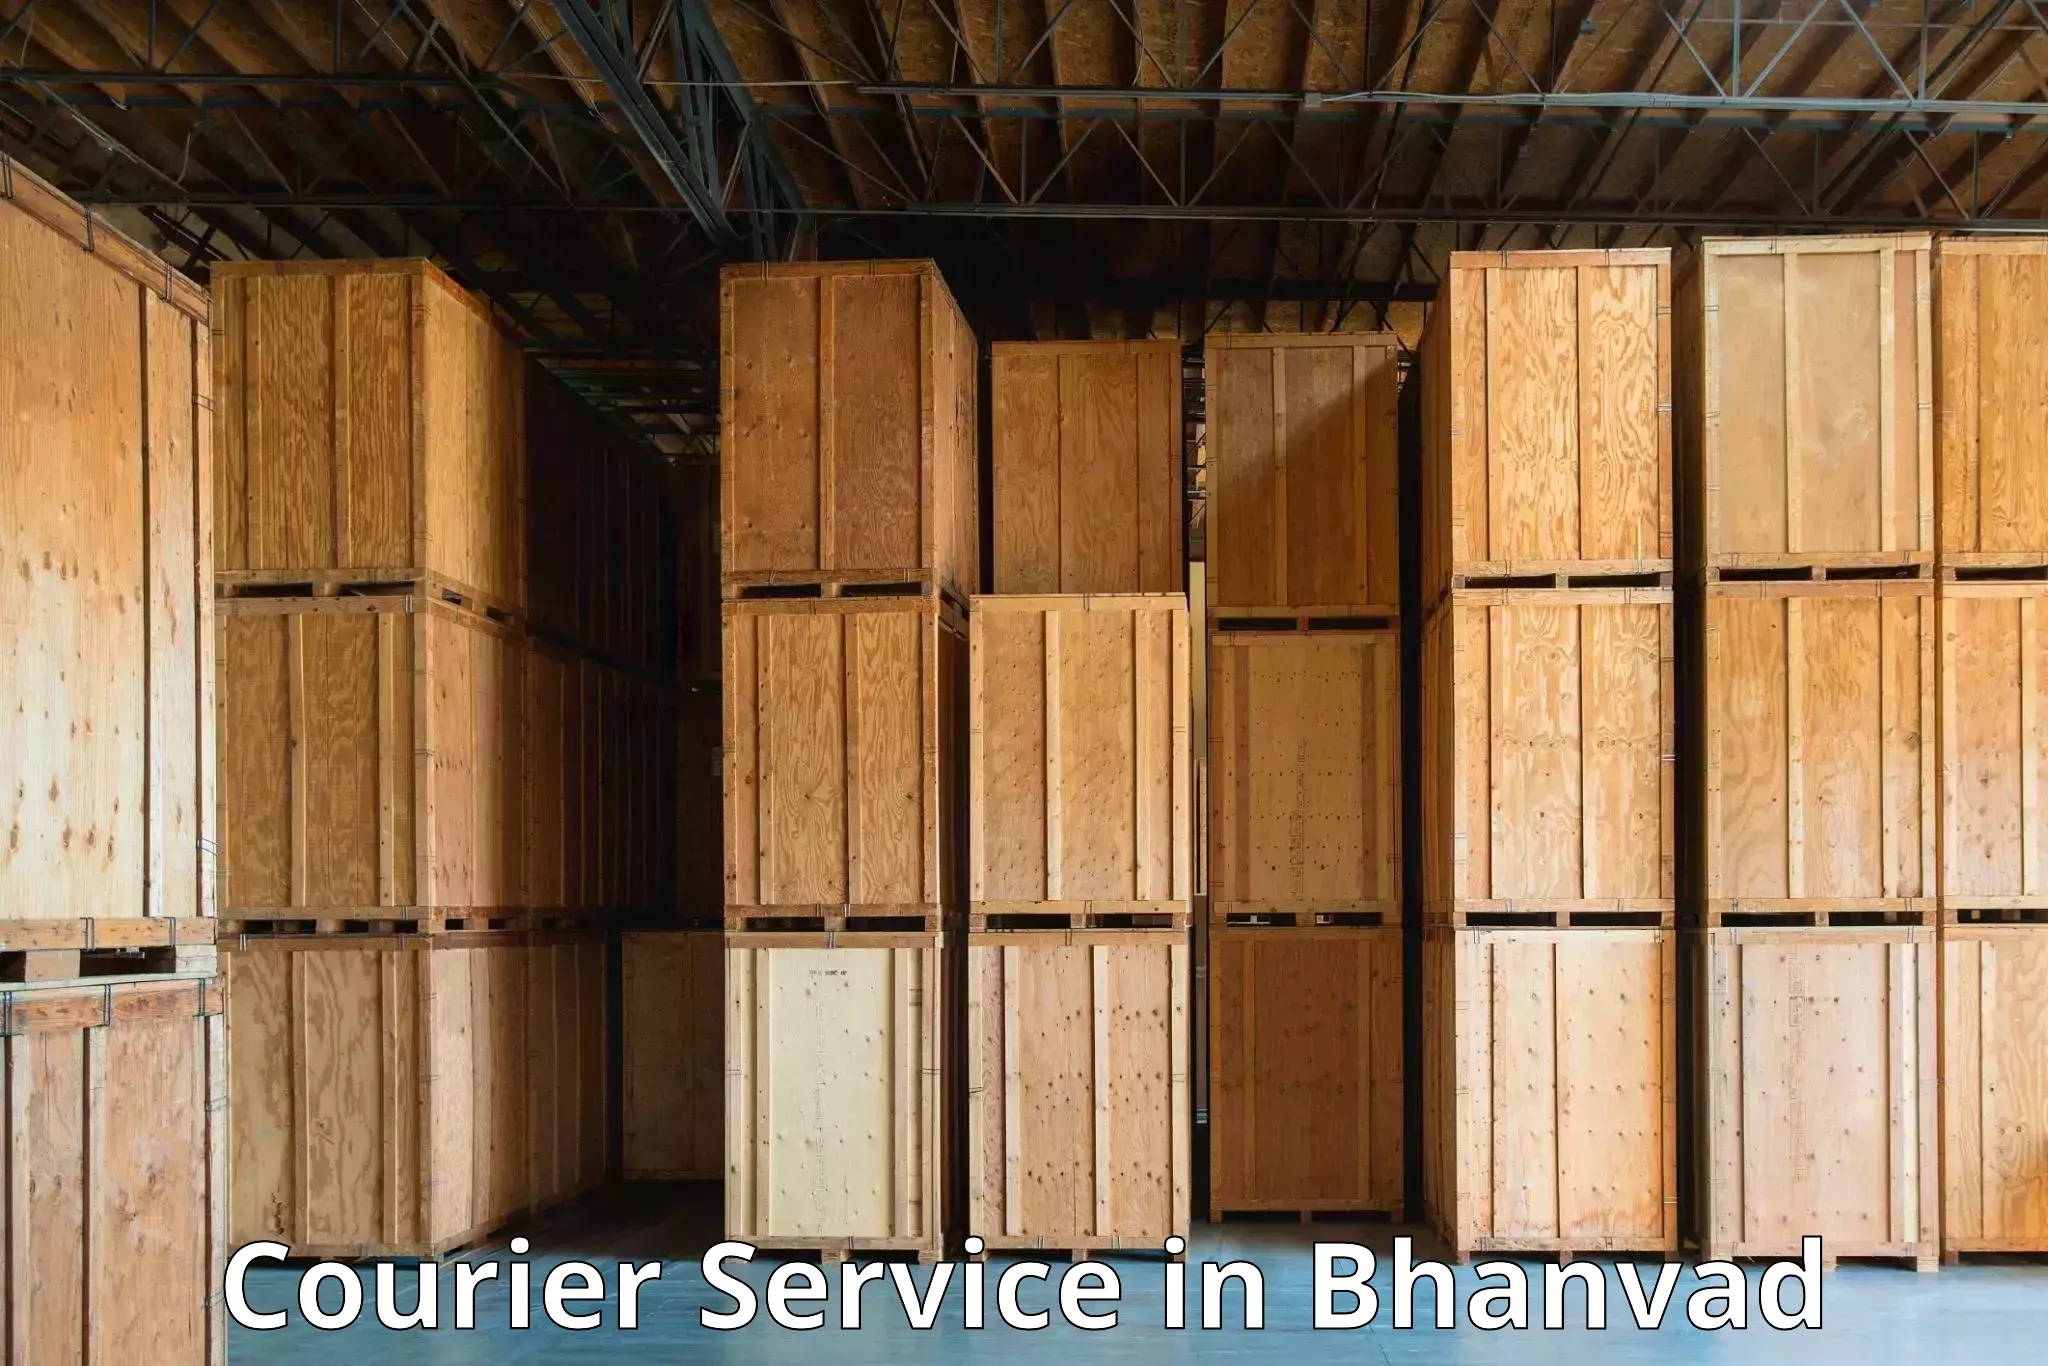 Courier services in Bhanvad